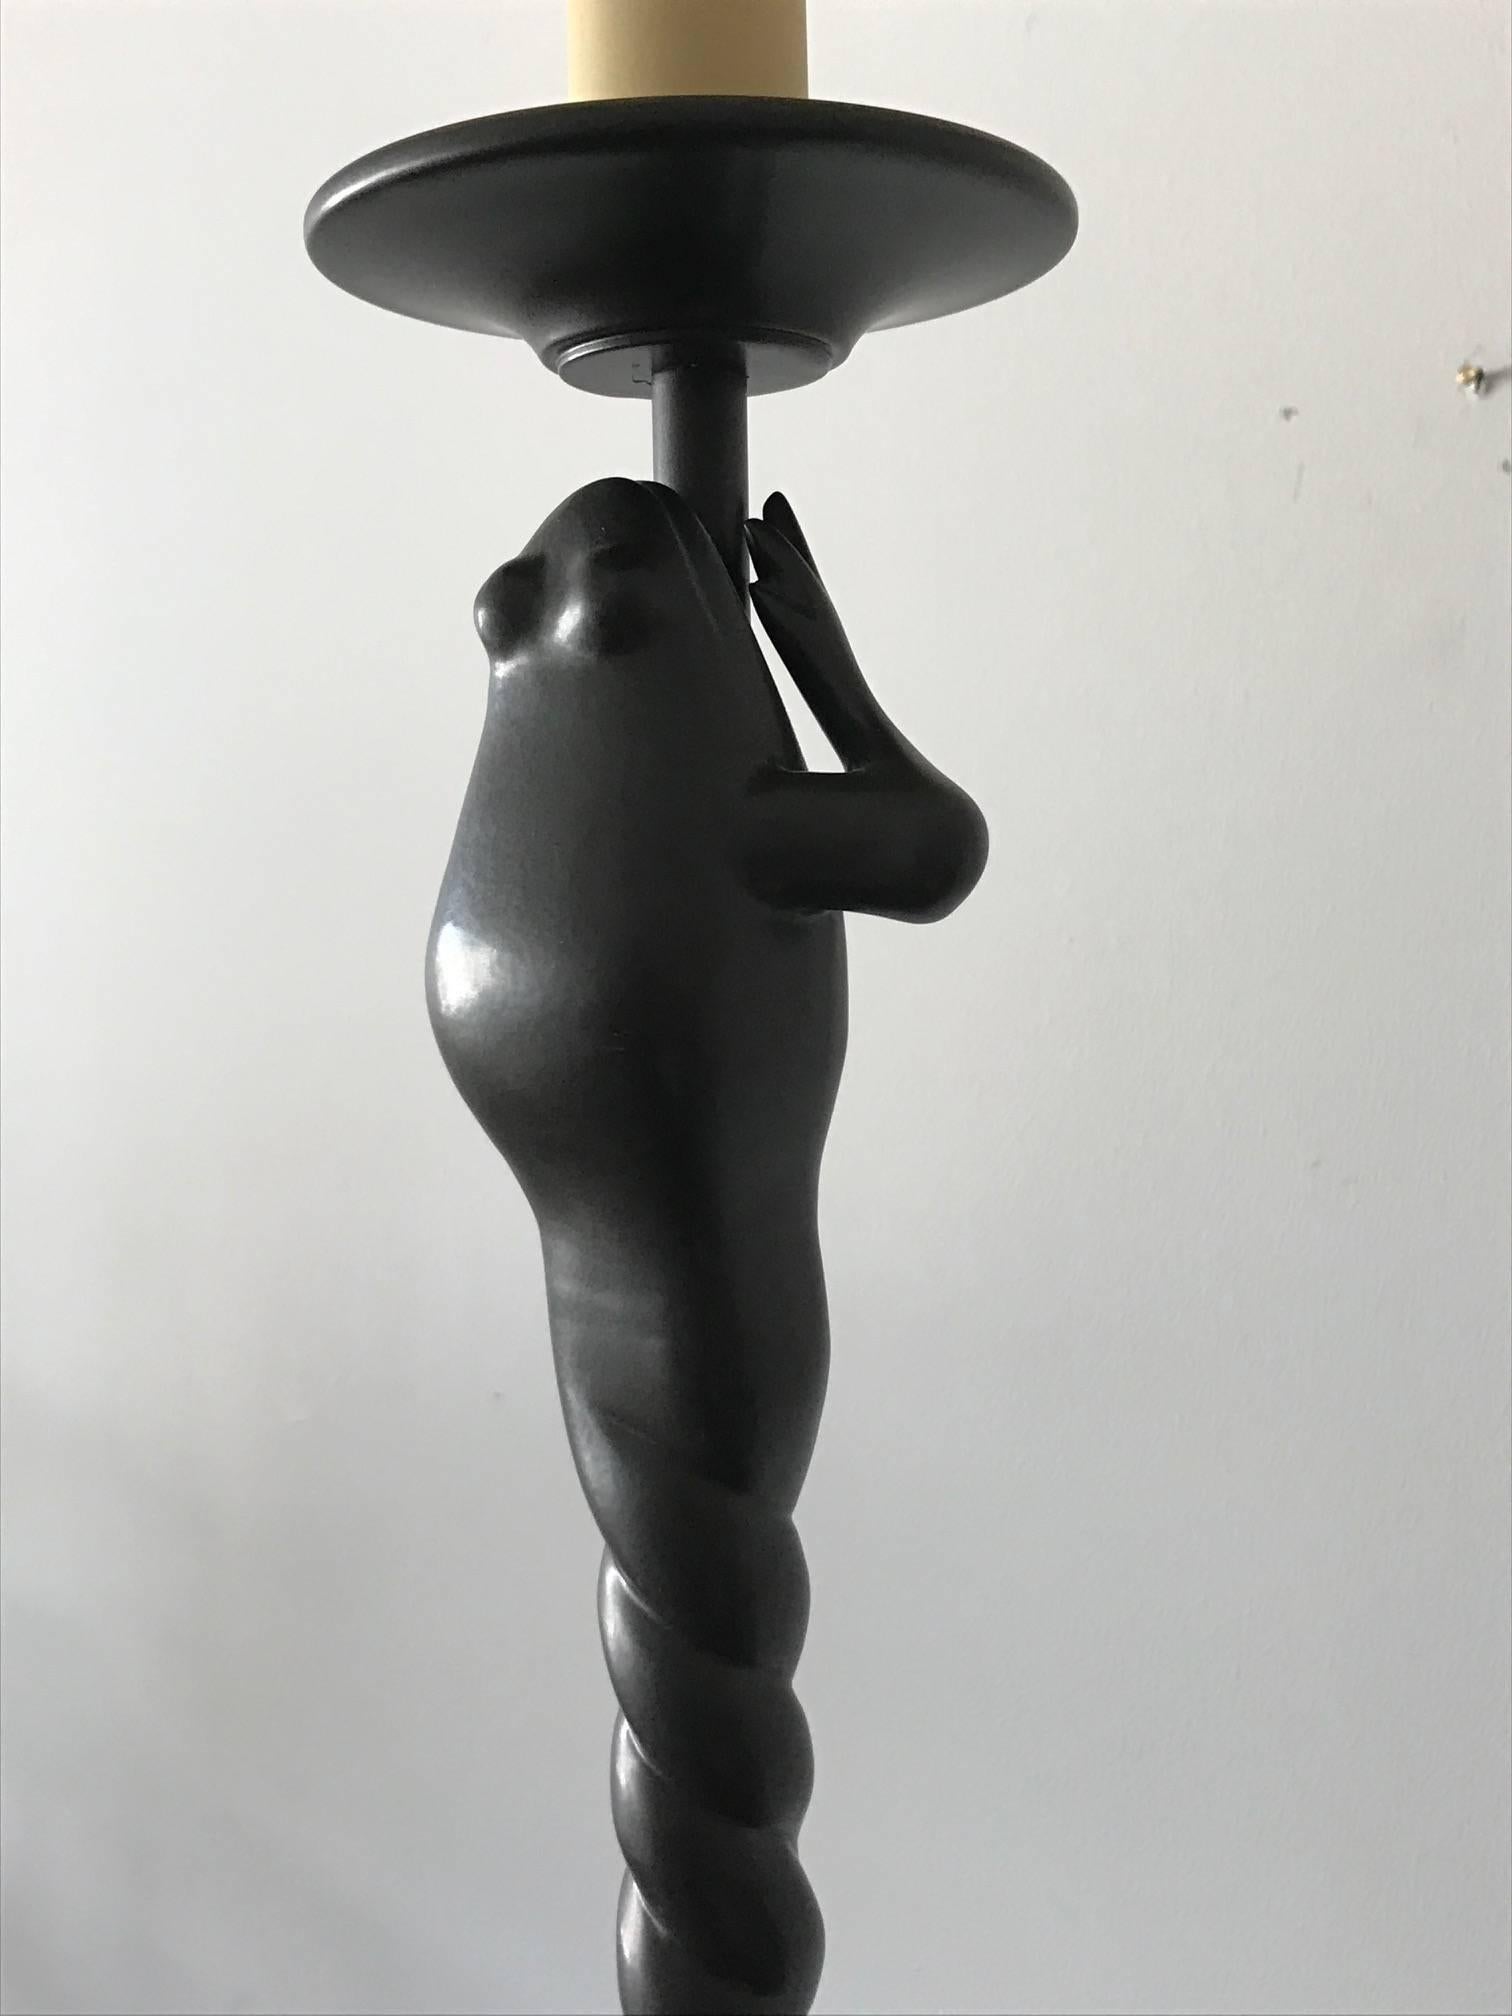 An unusual floor lamp by Chapman, circa 1979. Bronze finish, whimsical frog design.